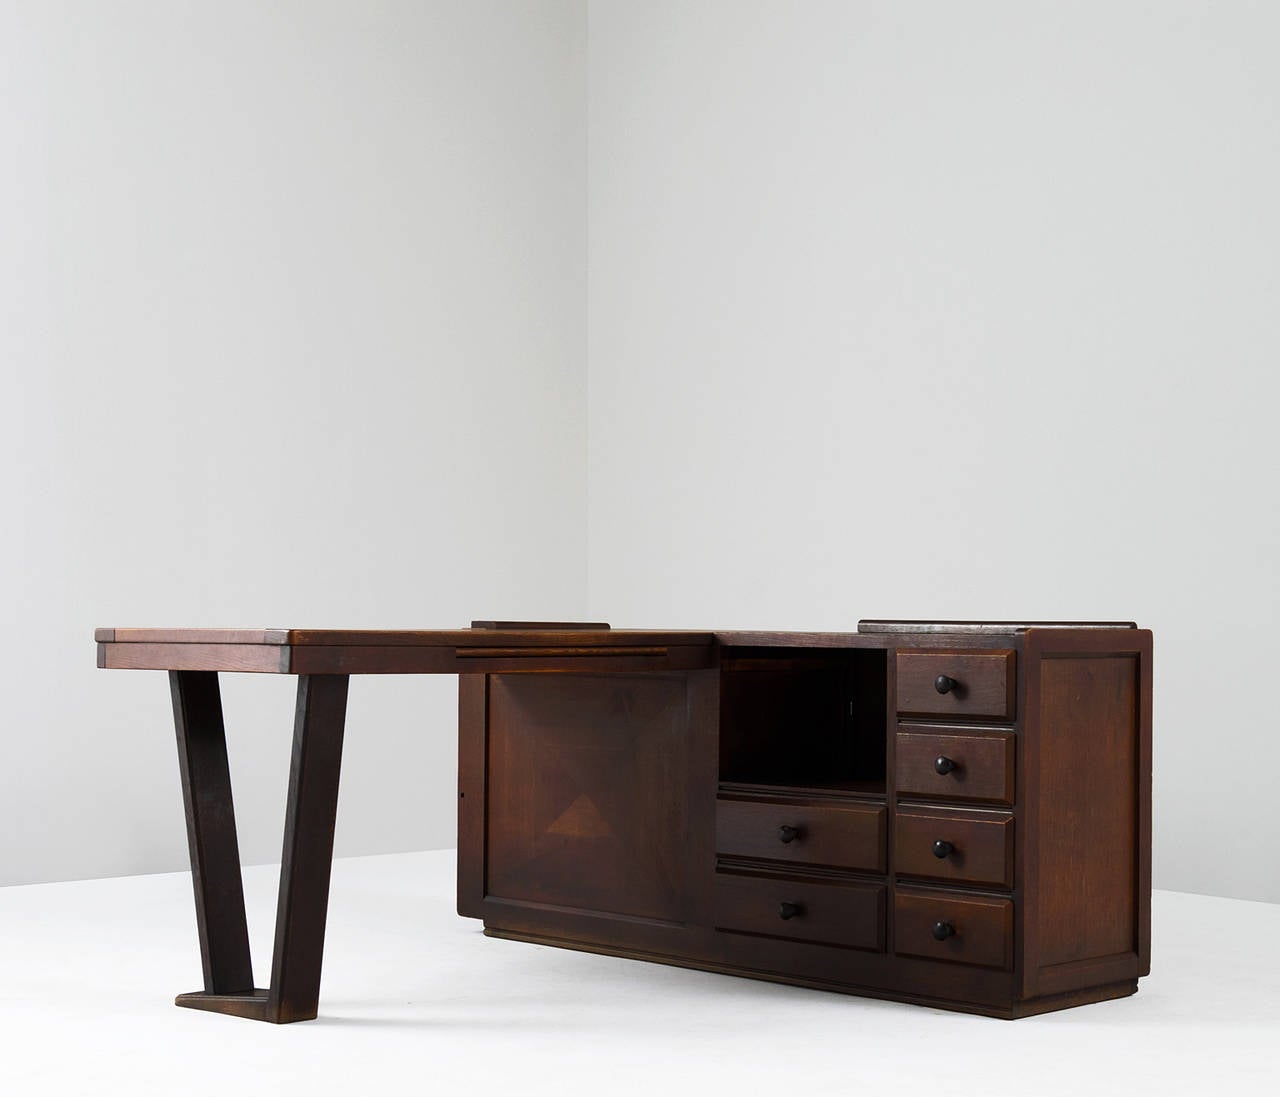 Dark stained oak desk by Guillerme et Chambron, France, 1950s.

This L-shaped desk has a large work surface and a return with plenty of storage facilities such a several drawers. The desk shows some highly crafted details and has an overall